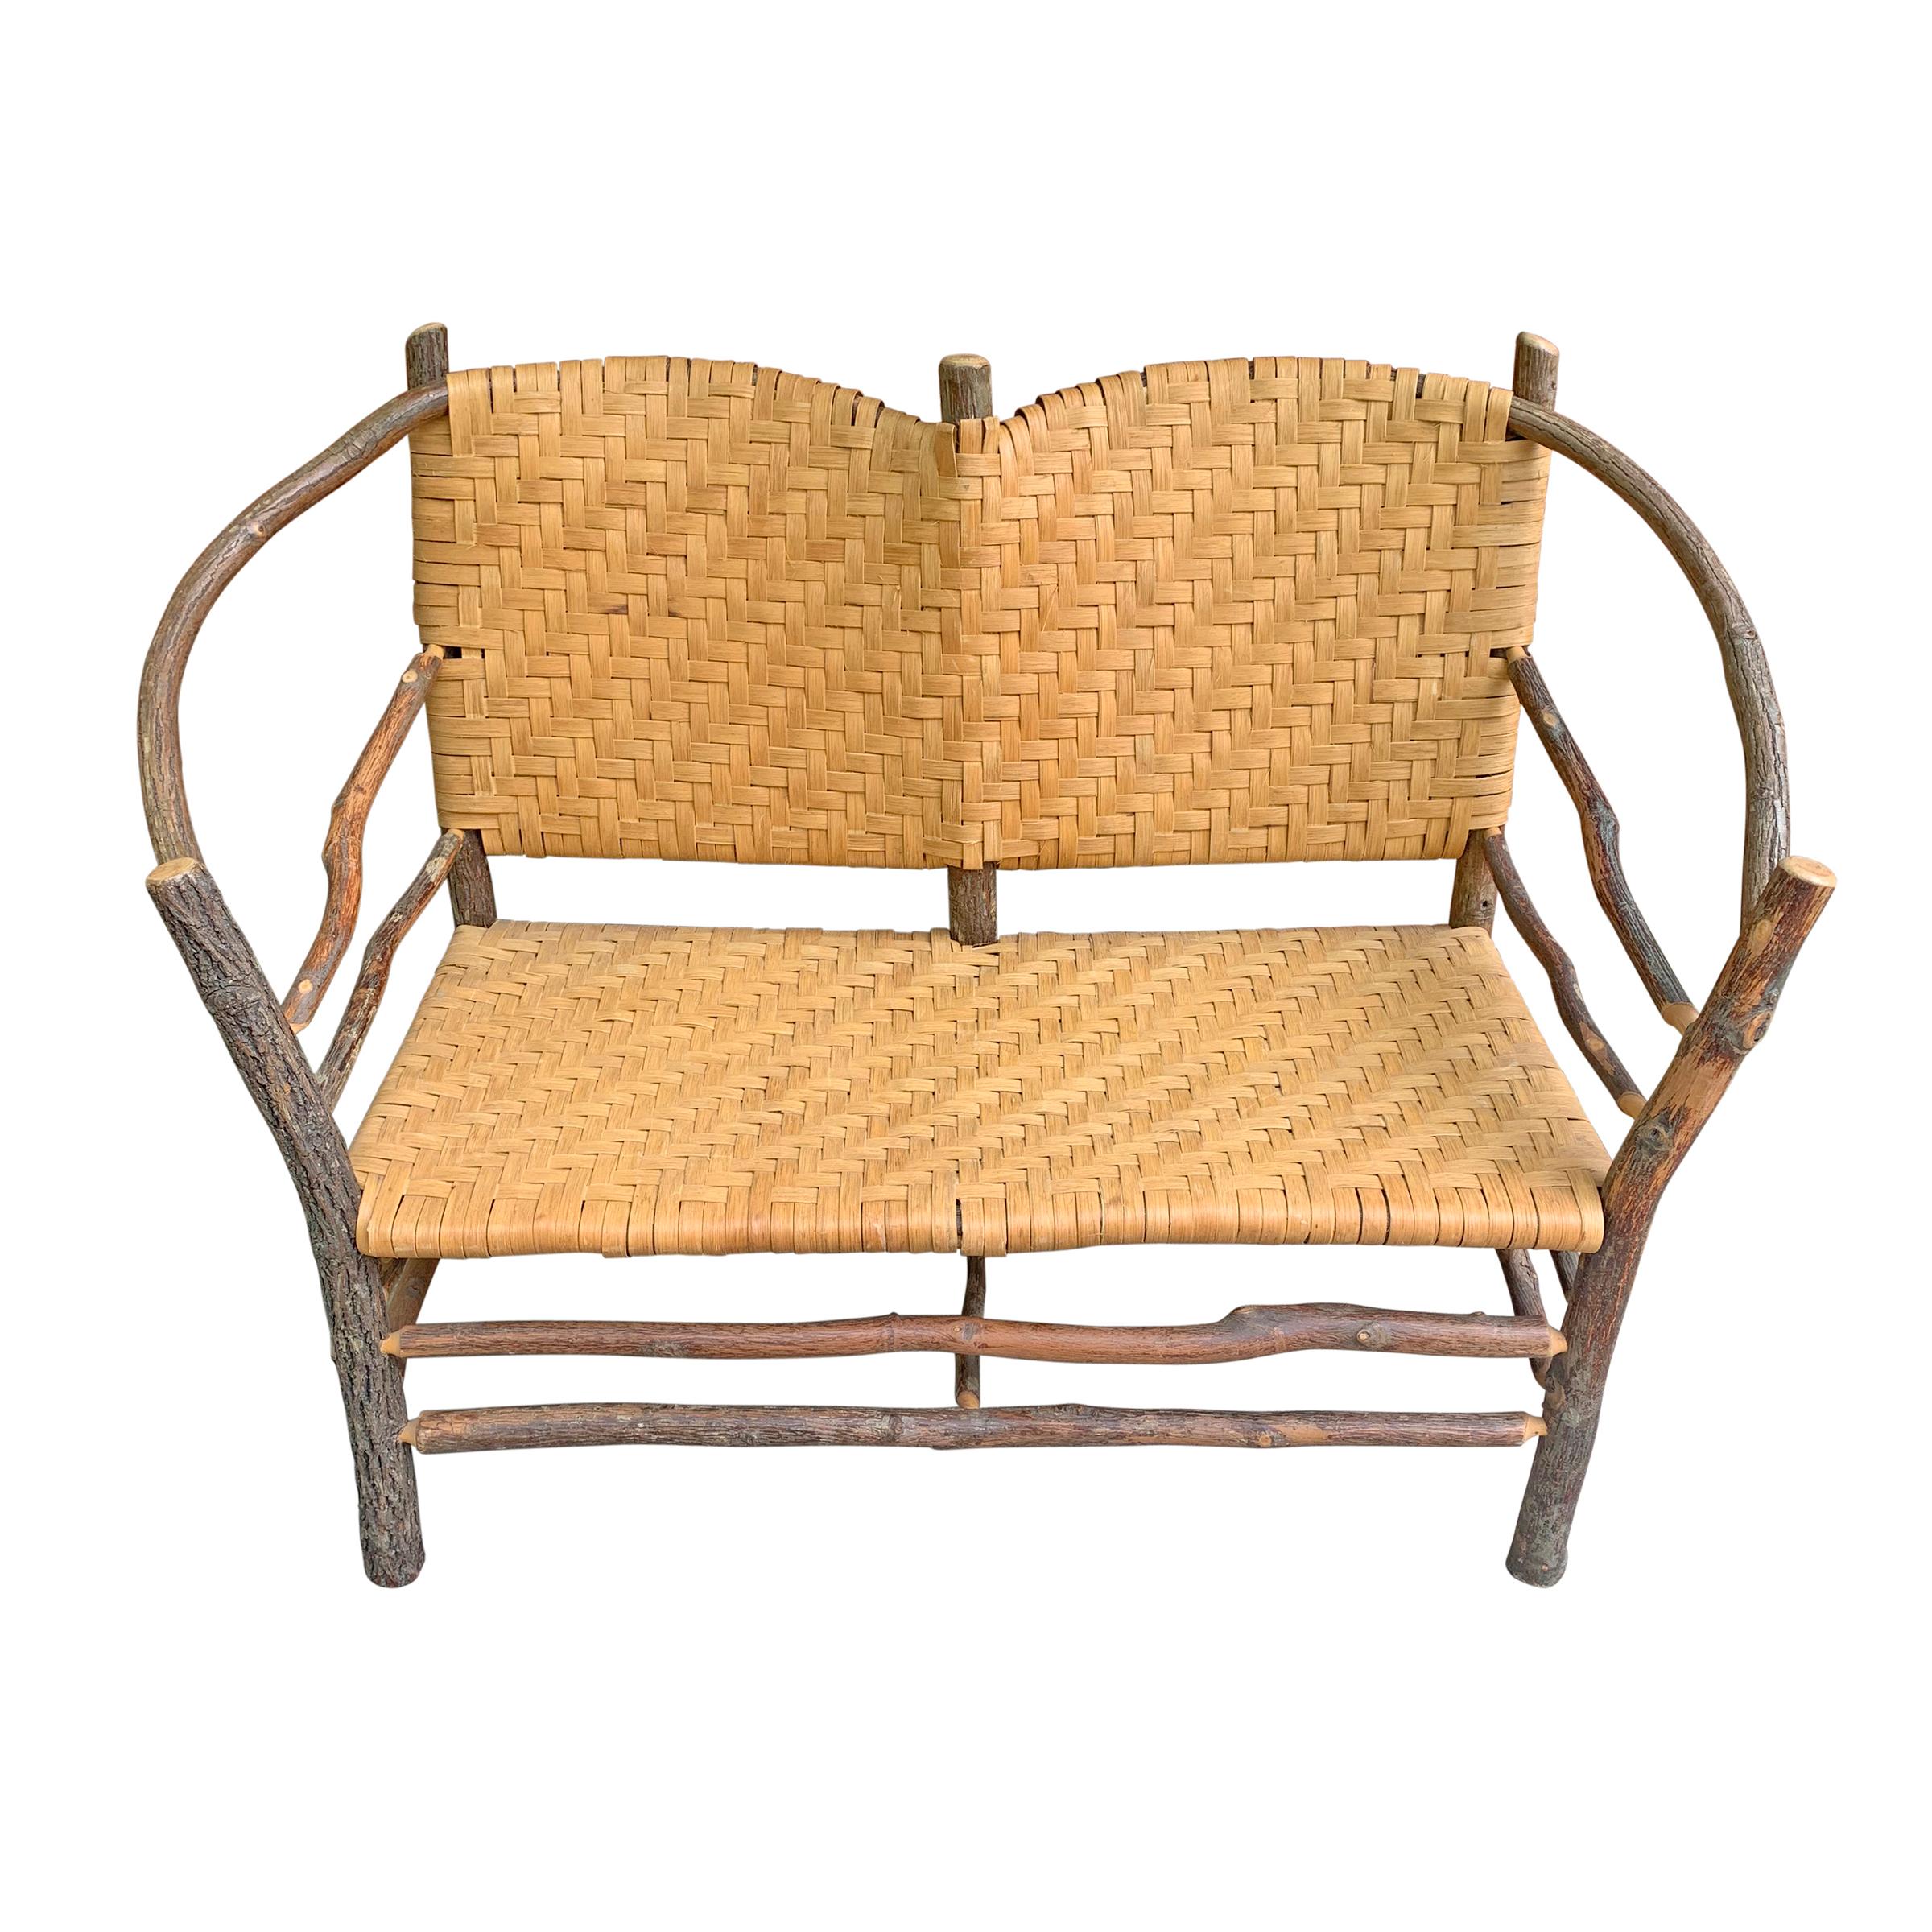 A wonderfully charming mid-20th century American Old Hickory barrel-back settee with a bent hickory frame and a woven splint seat and back. The perfect settee for your front porch or sunroom of your country cottage.